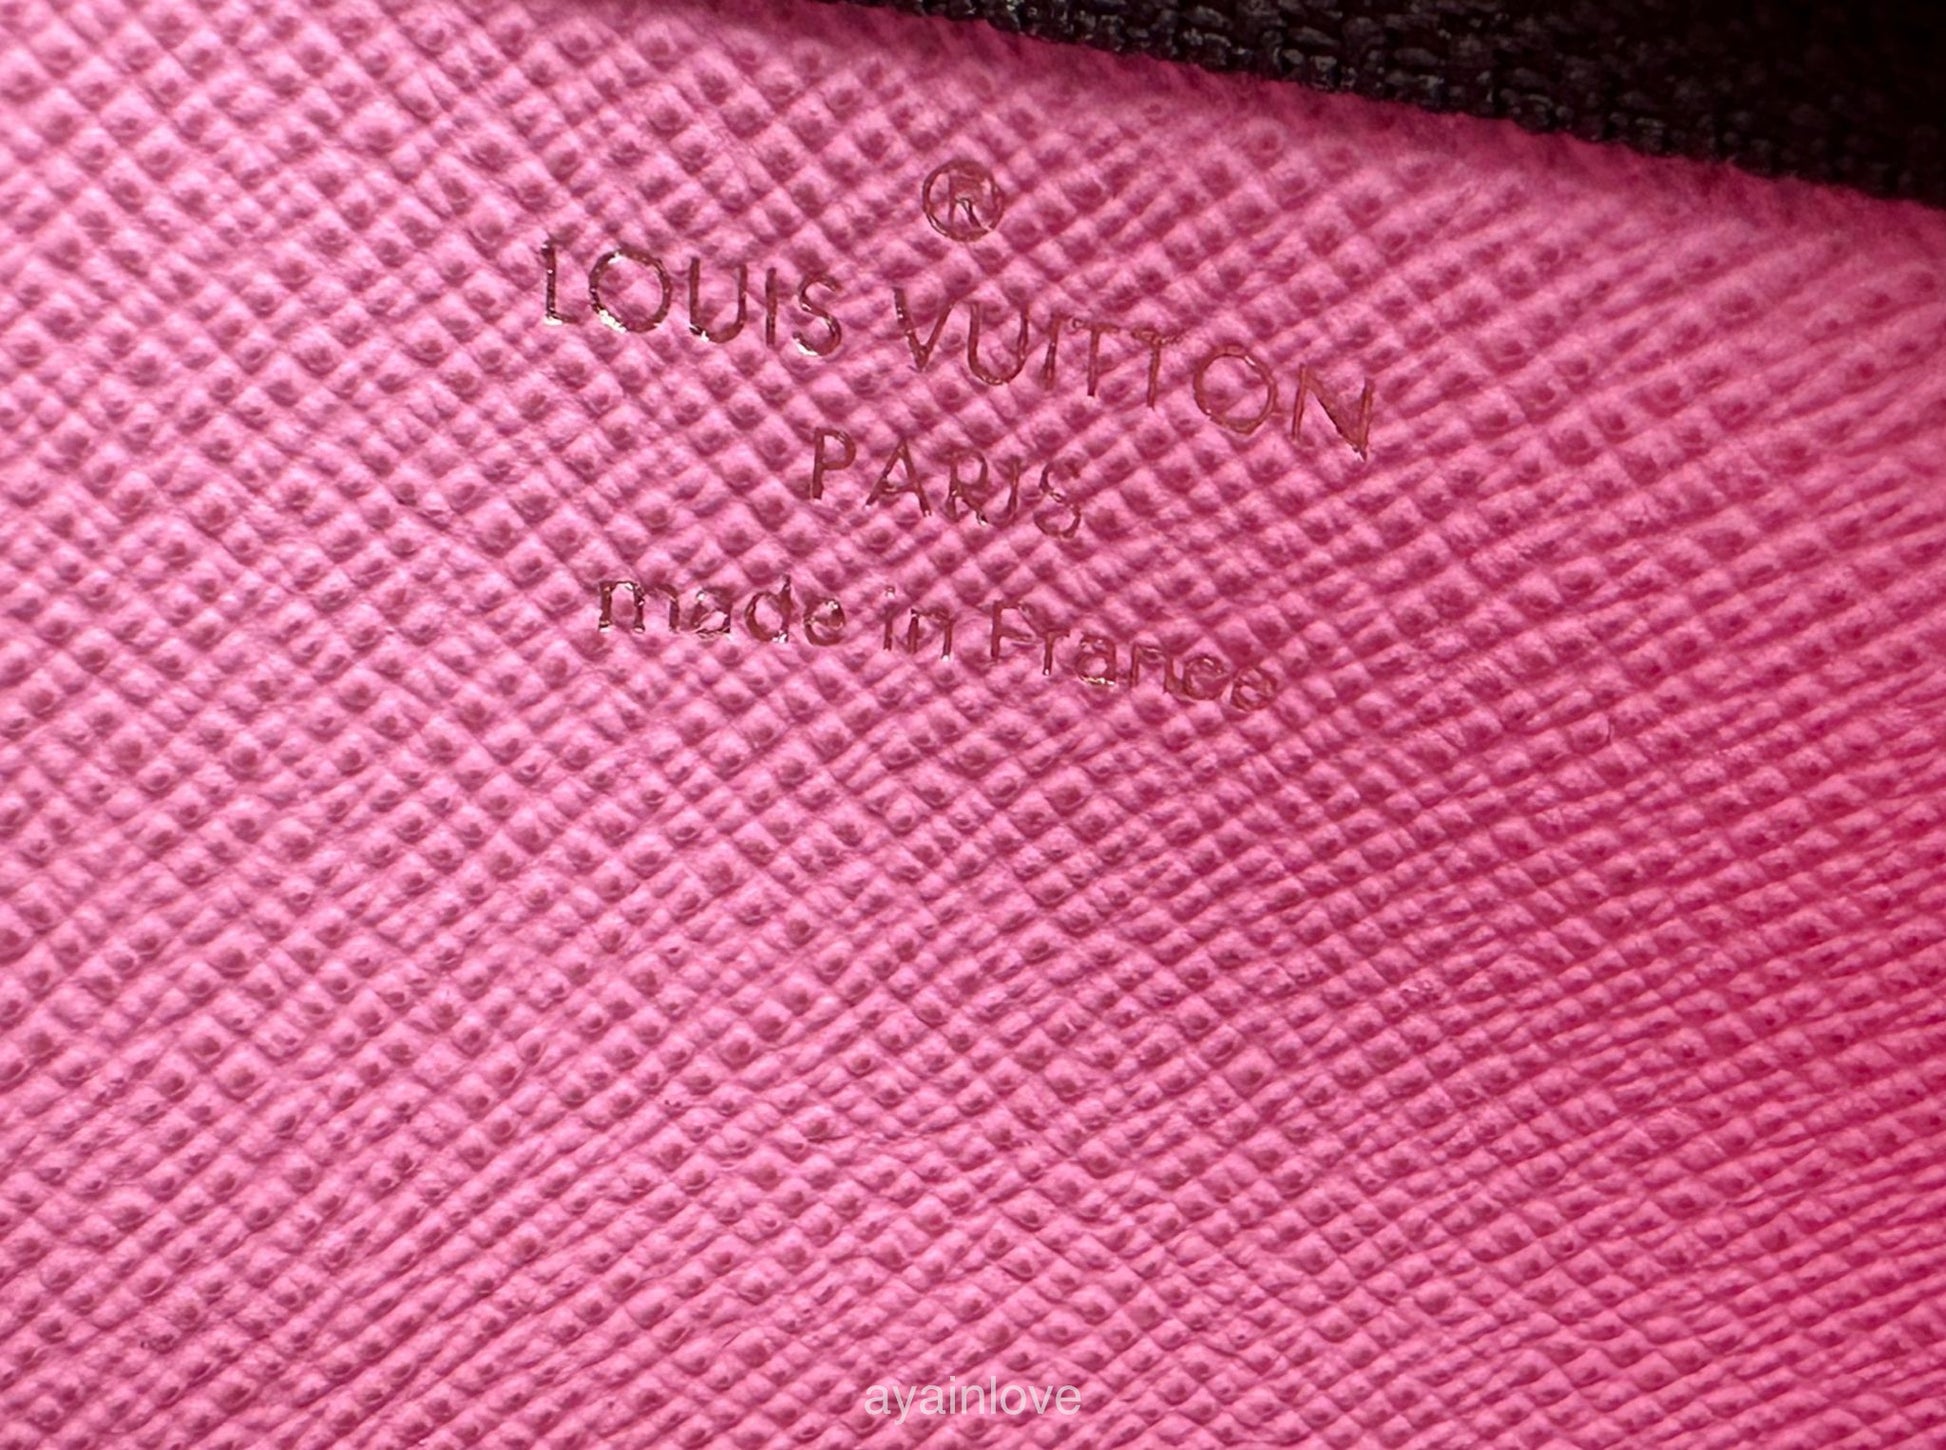 Louis Vuitton Key Pouch Vivienne Holiday Monogram Canvas/Pink in